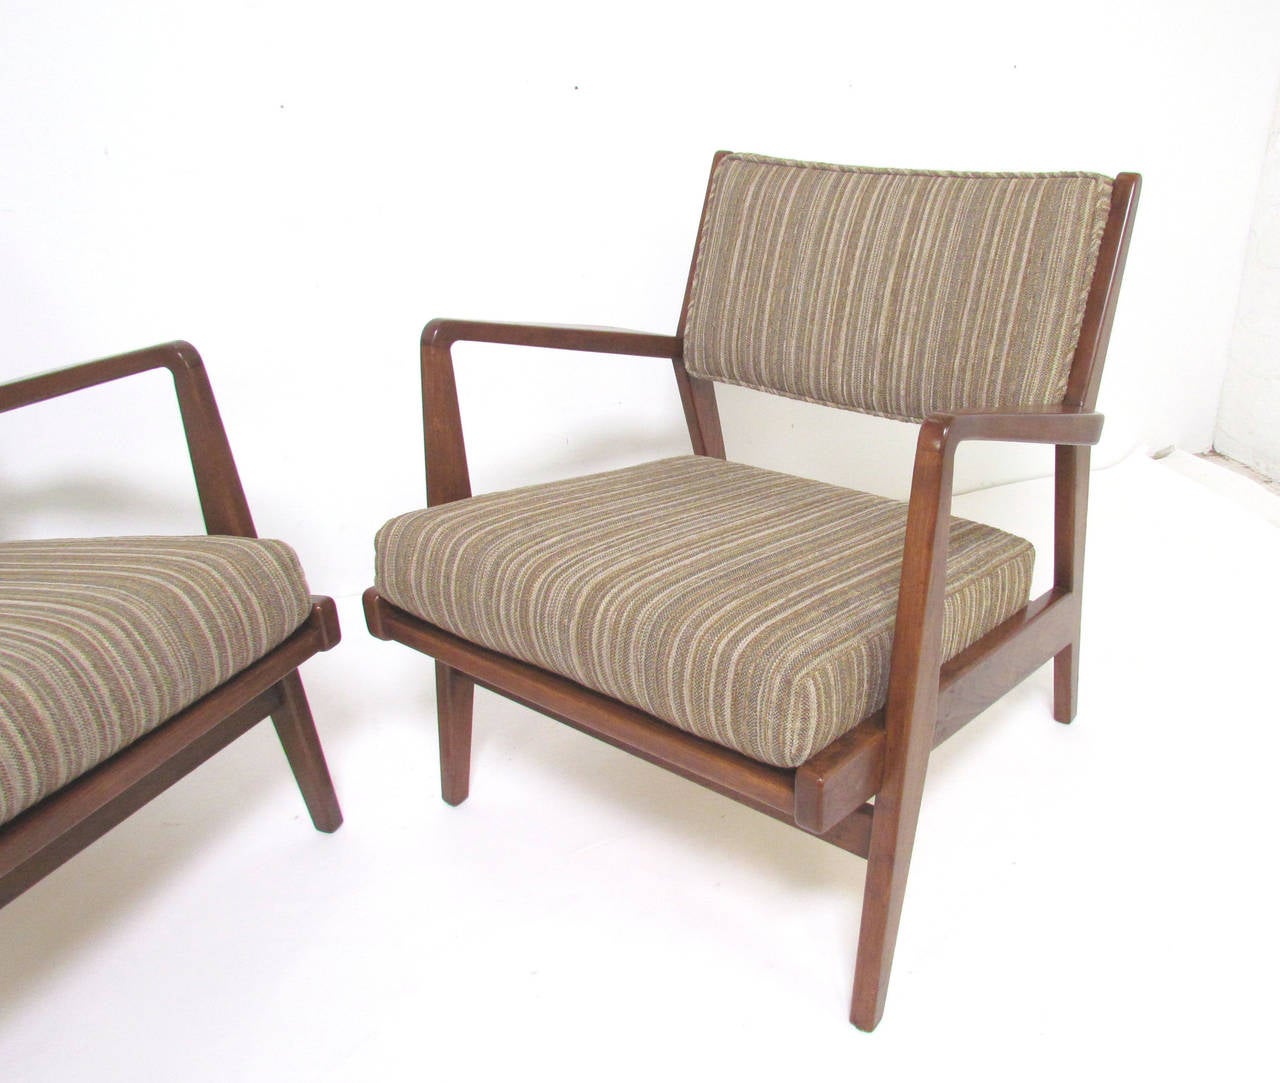 American Classic Pair of Mid-Century Modern Lounge Armchairs by Jens Risom